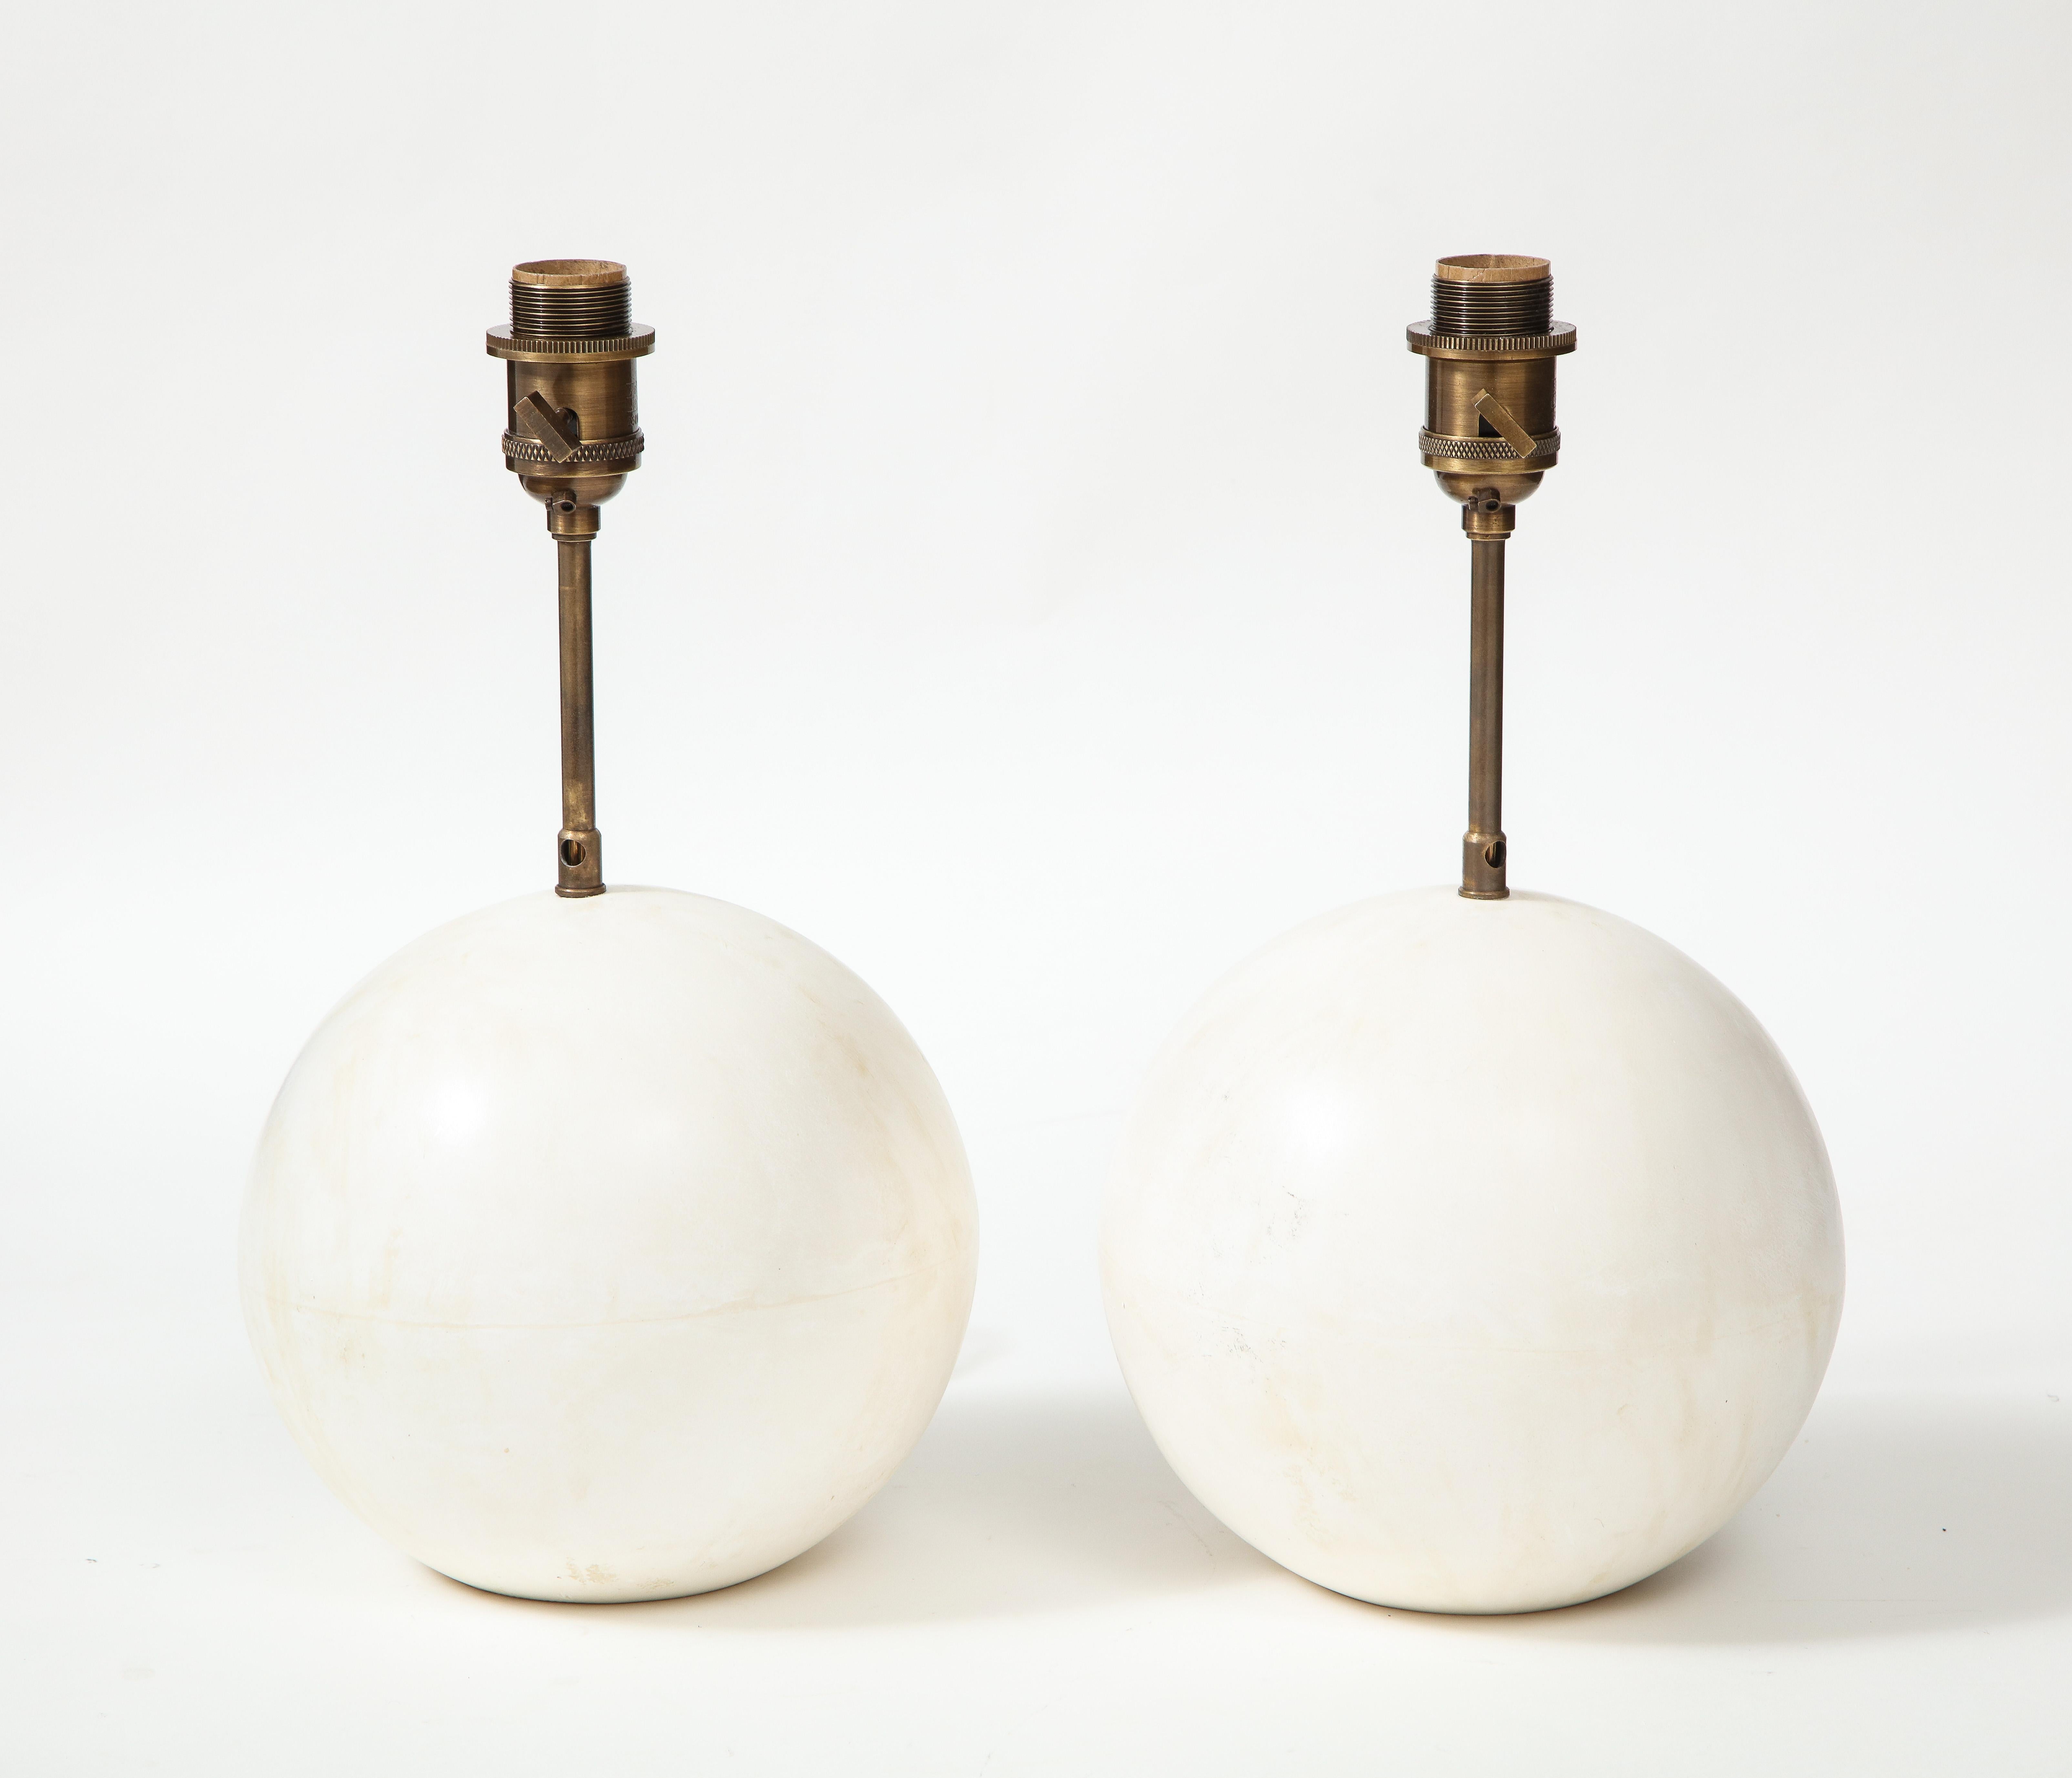 Modern Pair of Handmade Plaster Table Lamps with Globe Bases by Facto Atelier Paris